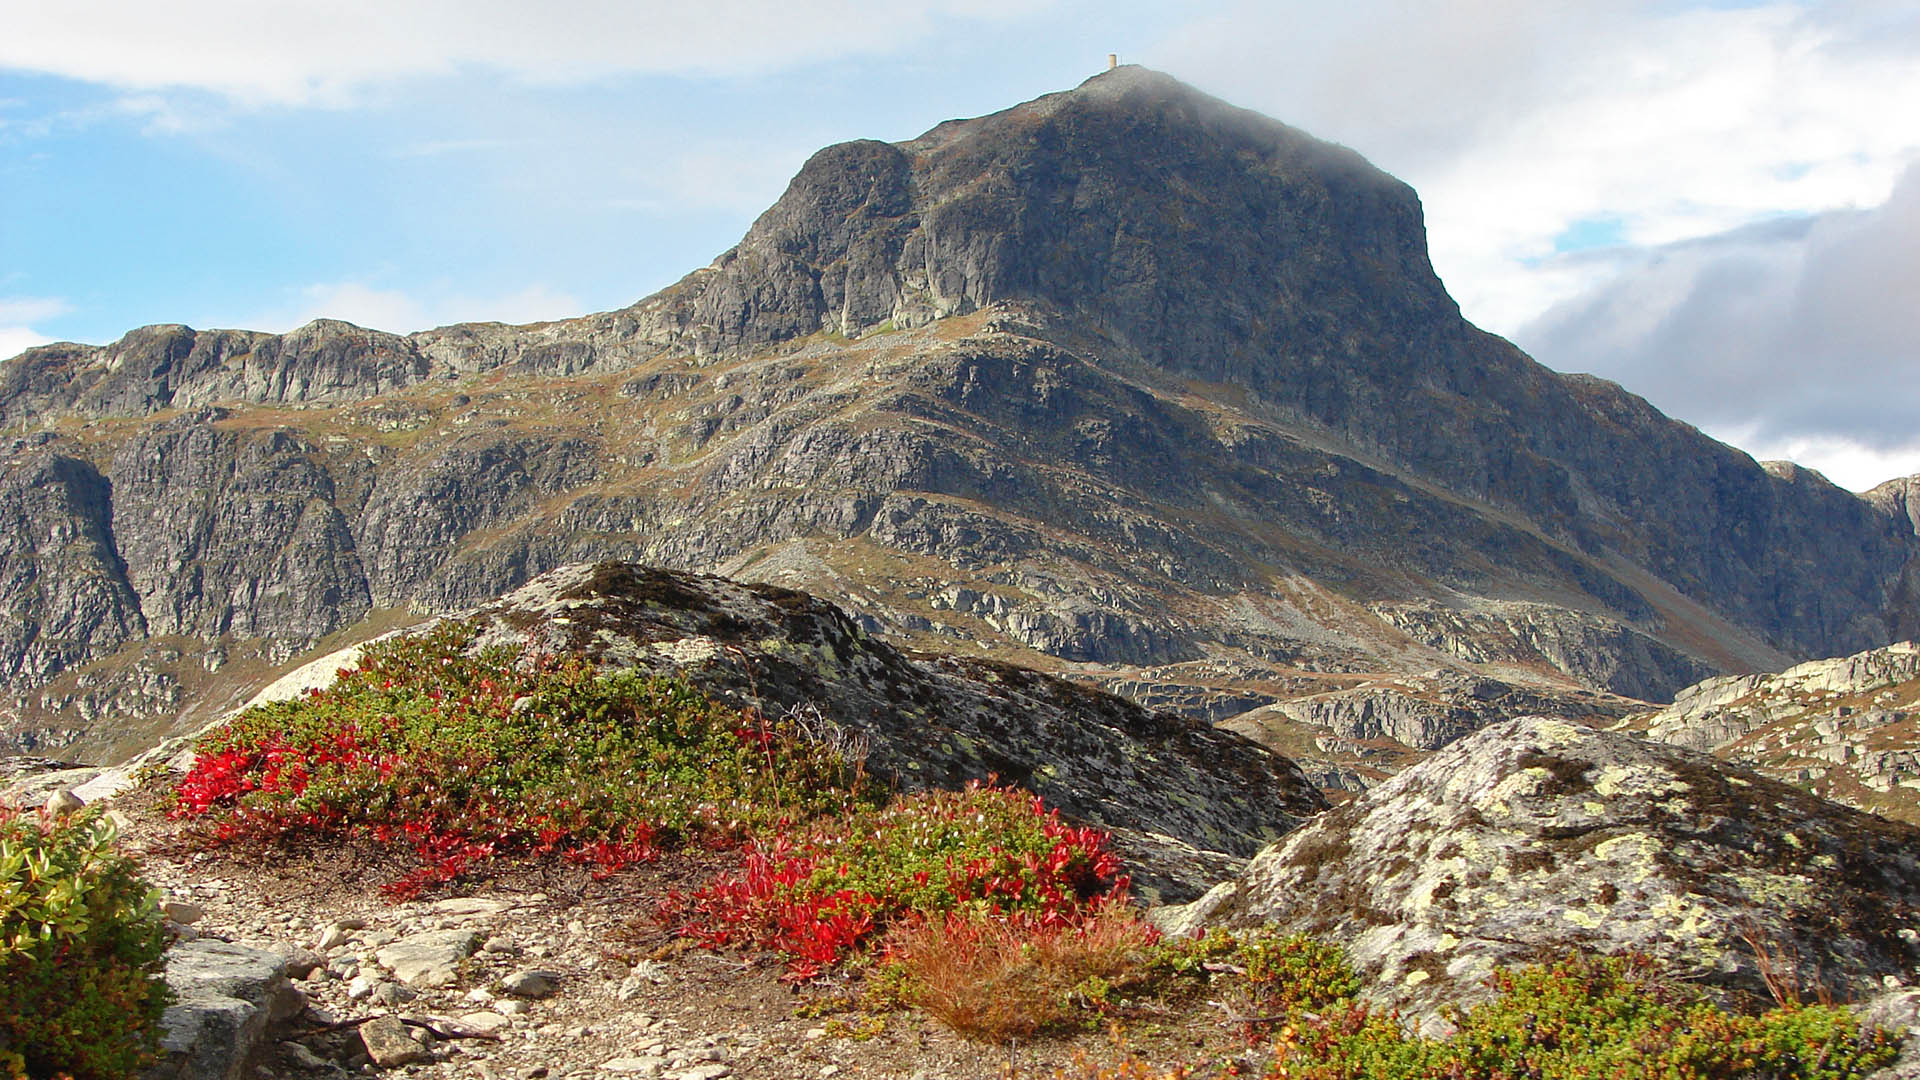 A characteristic, hat-shaped mountain in the background and low rocks in the foreground that are covered with lichens and red autumn vegetation